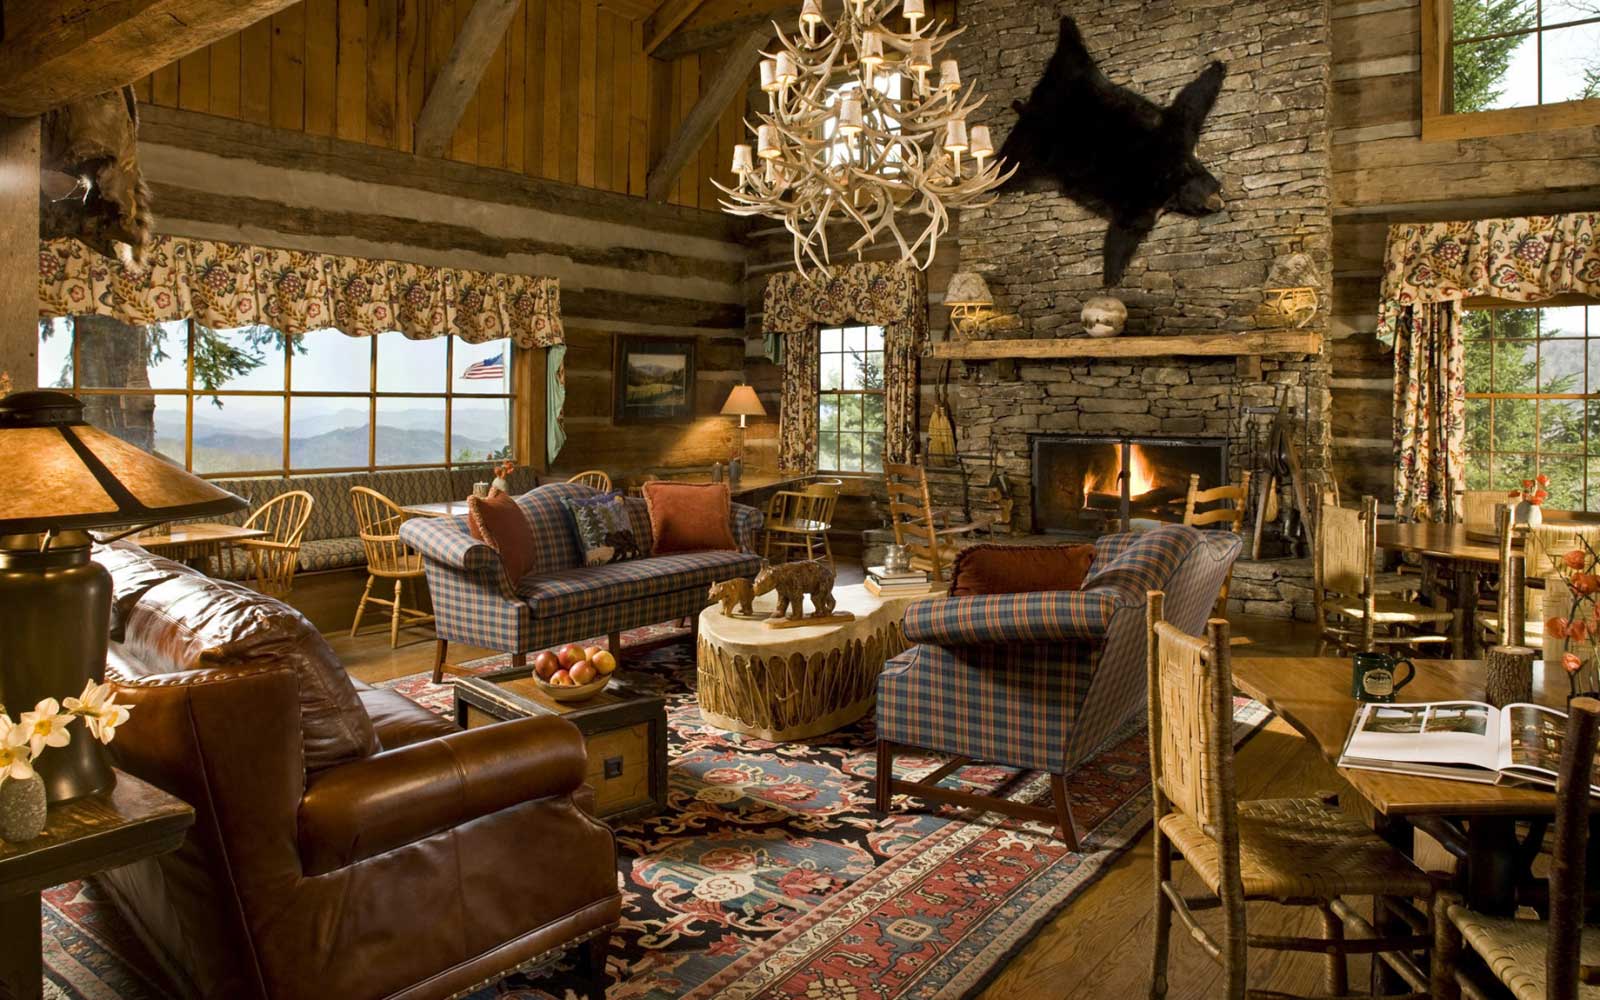 Rustic Living With Fascinating Rustic Living Room Decor With Double Sofa And Wooden Table Furnished With Horn Chandelier Design And Completed With Fireplace Living Room Beautifying Living Room Decor Through The Right Room Spots